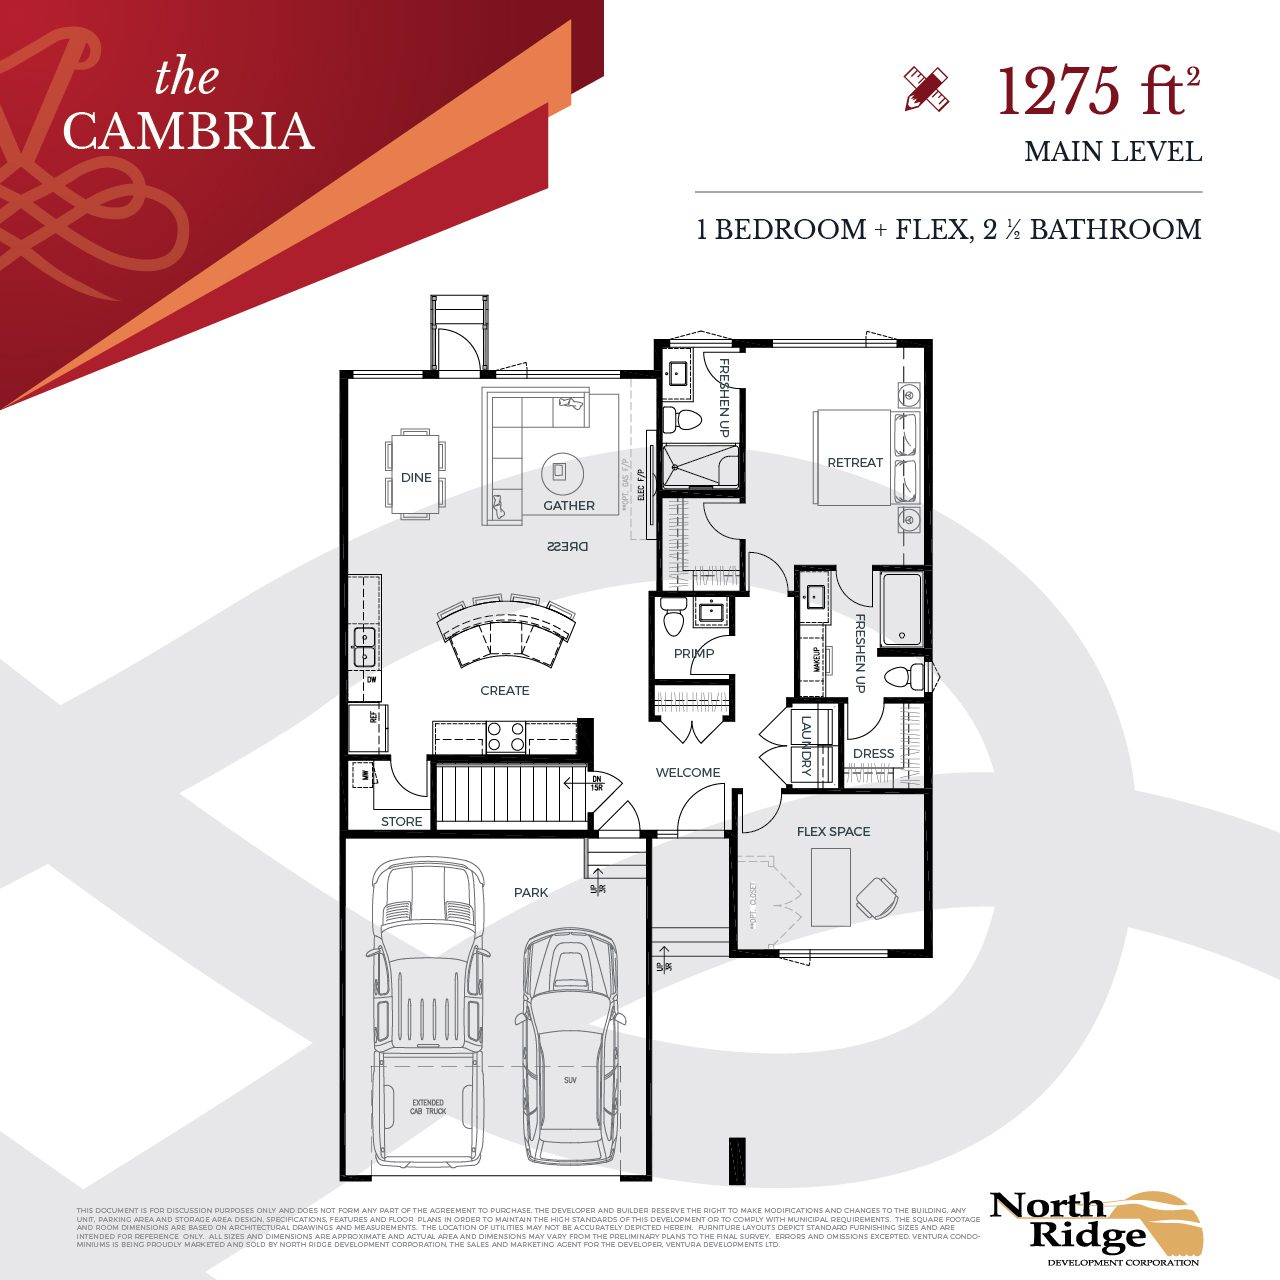 A floor plan for a one bedroom, two-ensuite, flex room, bungalow.